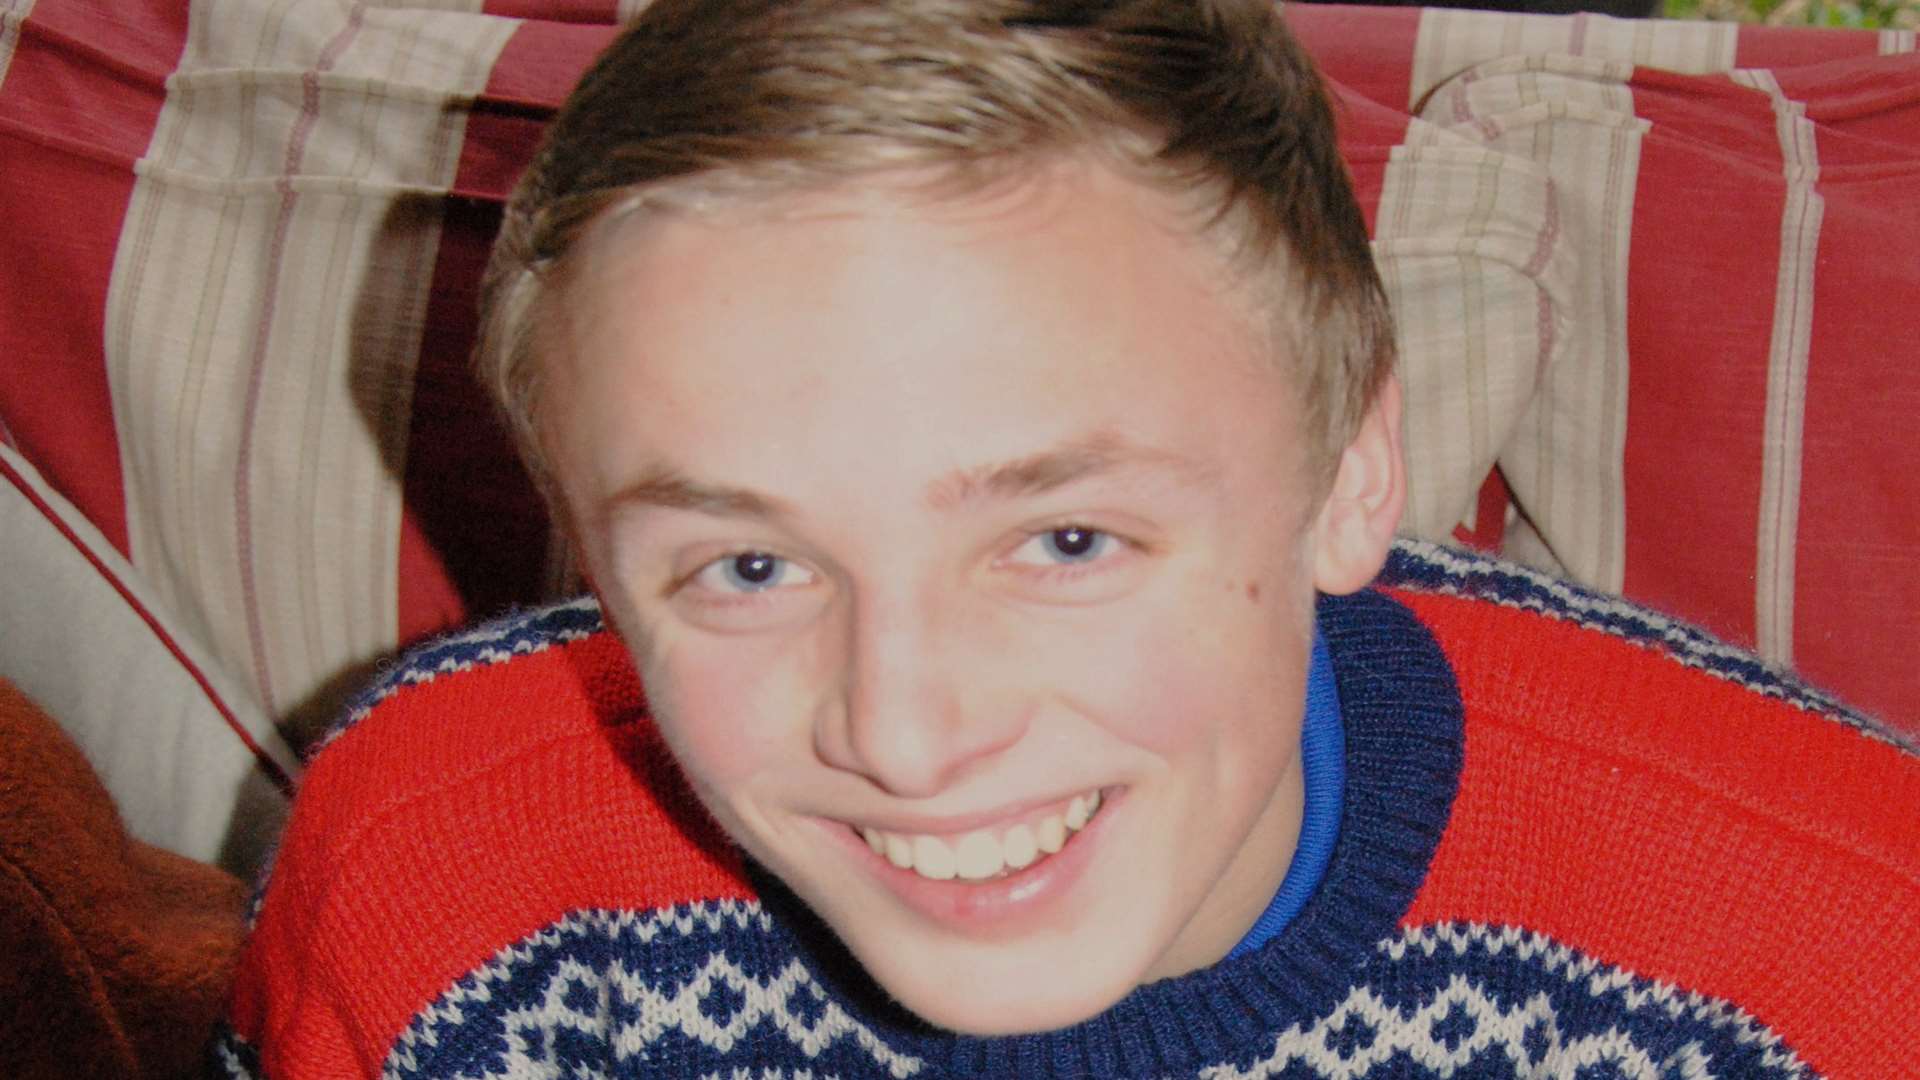 Tragic teenager Charlie Booth took his own life